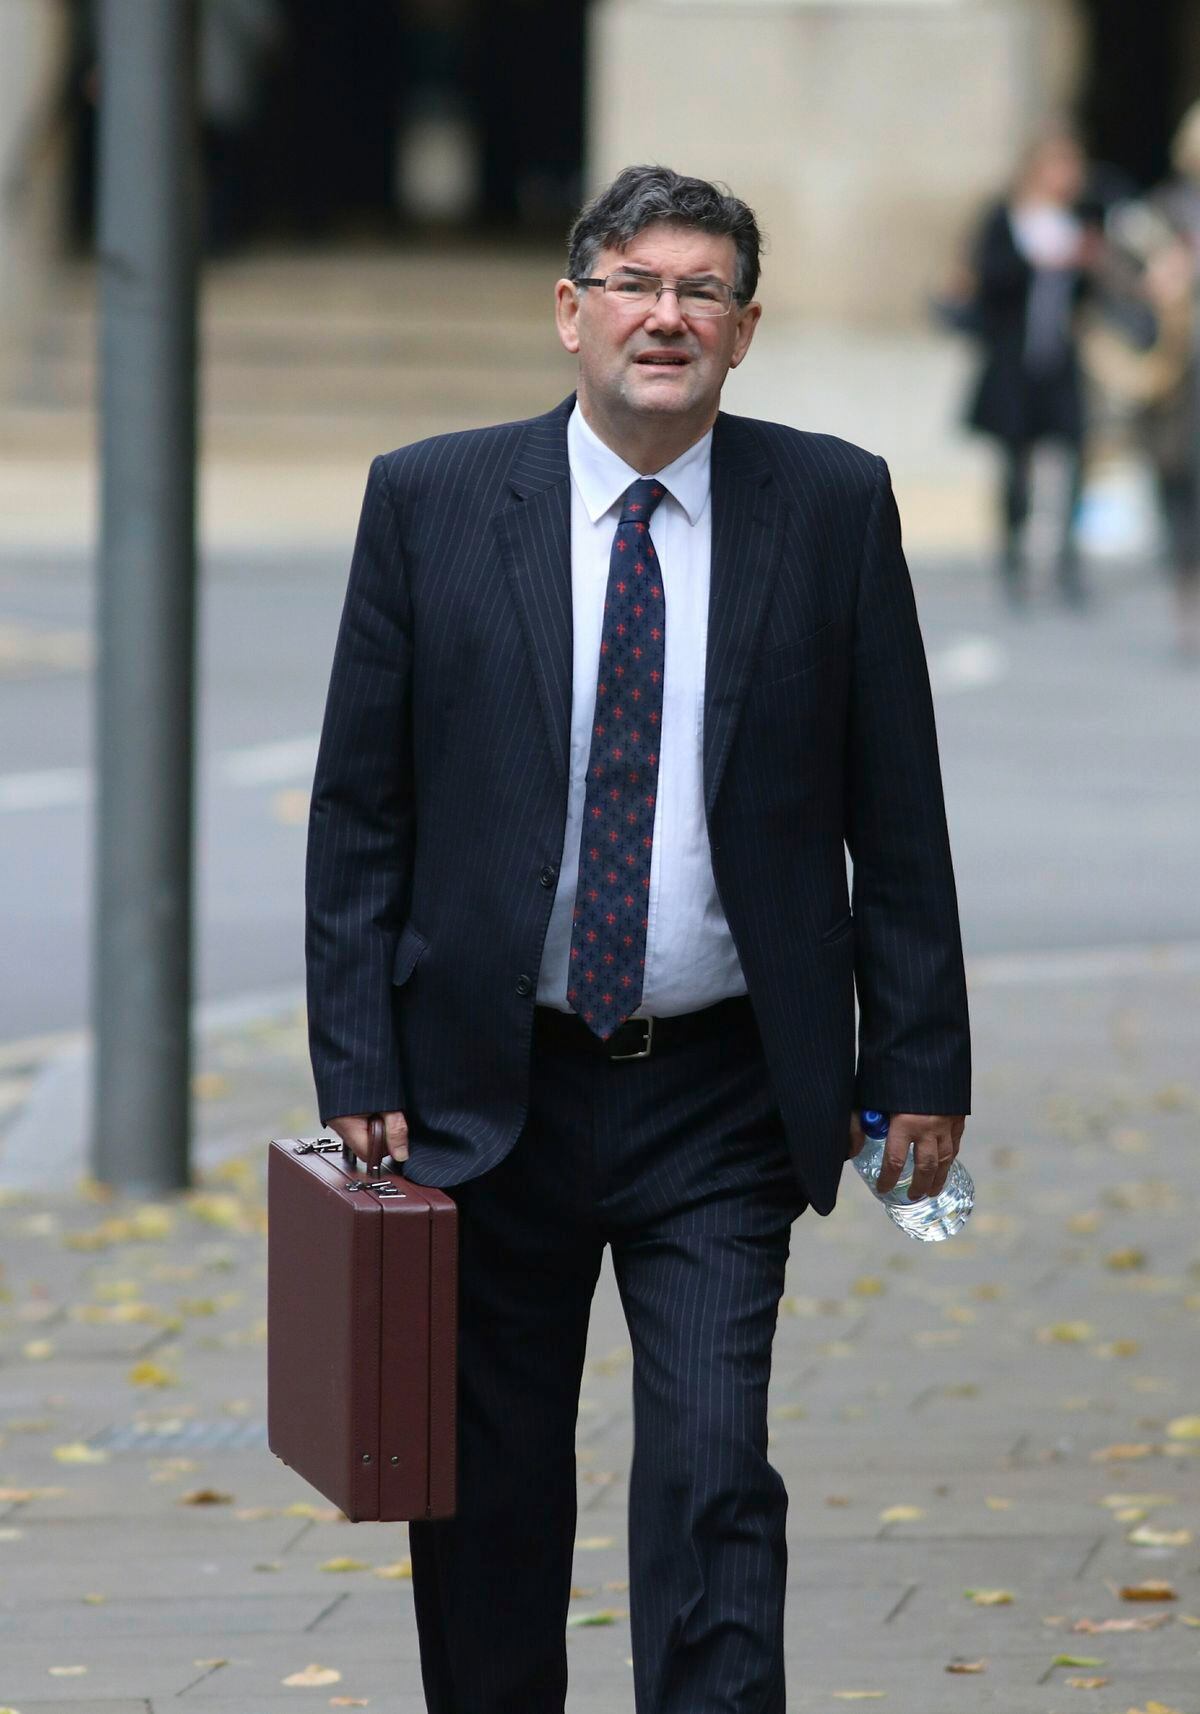 David Noakes, the creator of the ‘wonder drug’ GcMAF, made from human blood, pictured arriving for a previous court hearing in London. He has now admitted charges relating to the manufacture, sale and possession of products, including GcMAF, and to money laundering.
